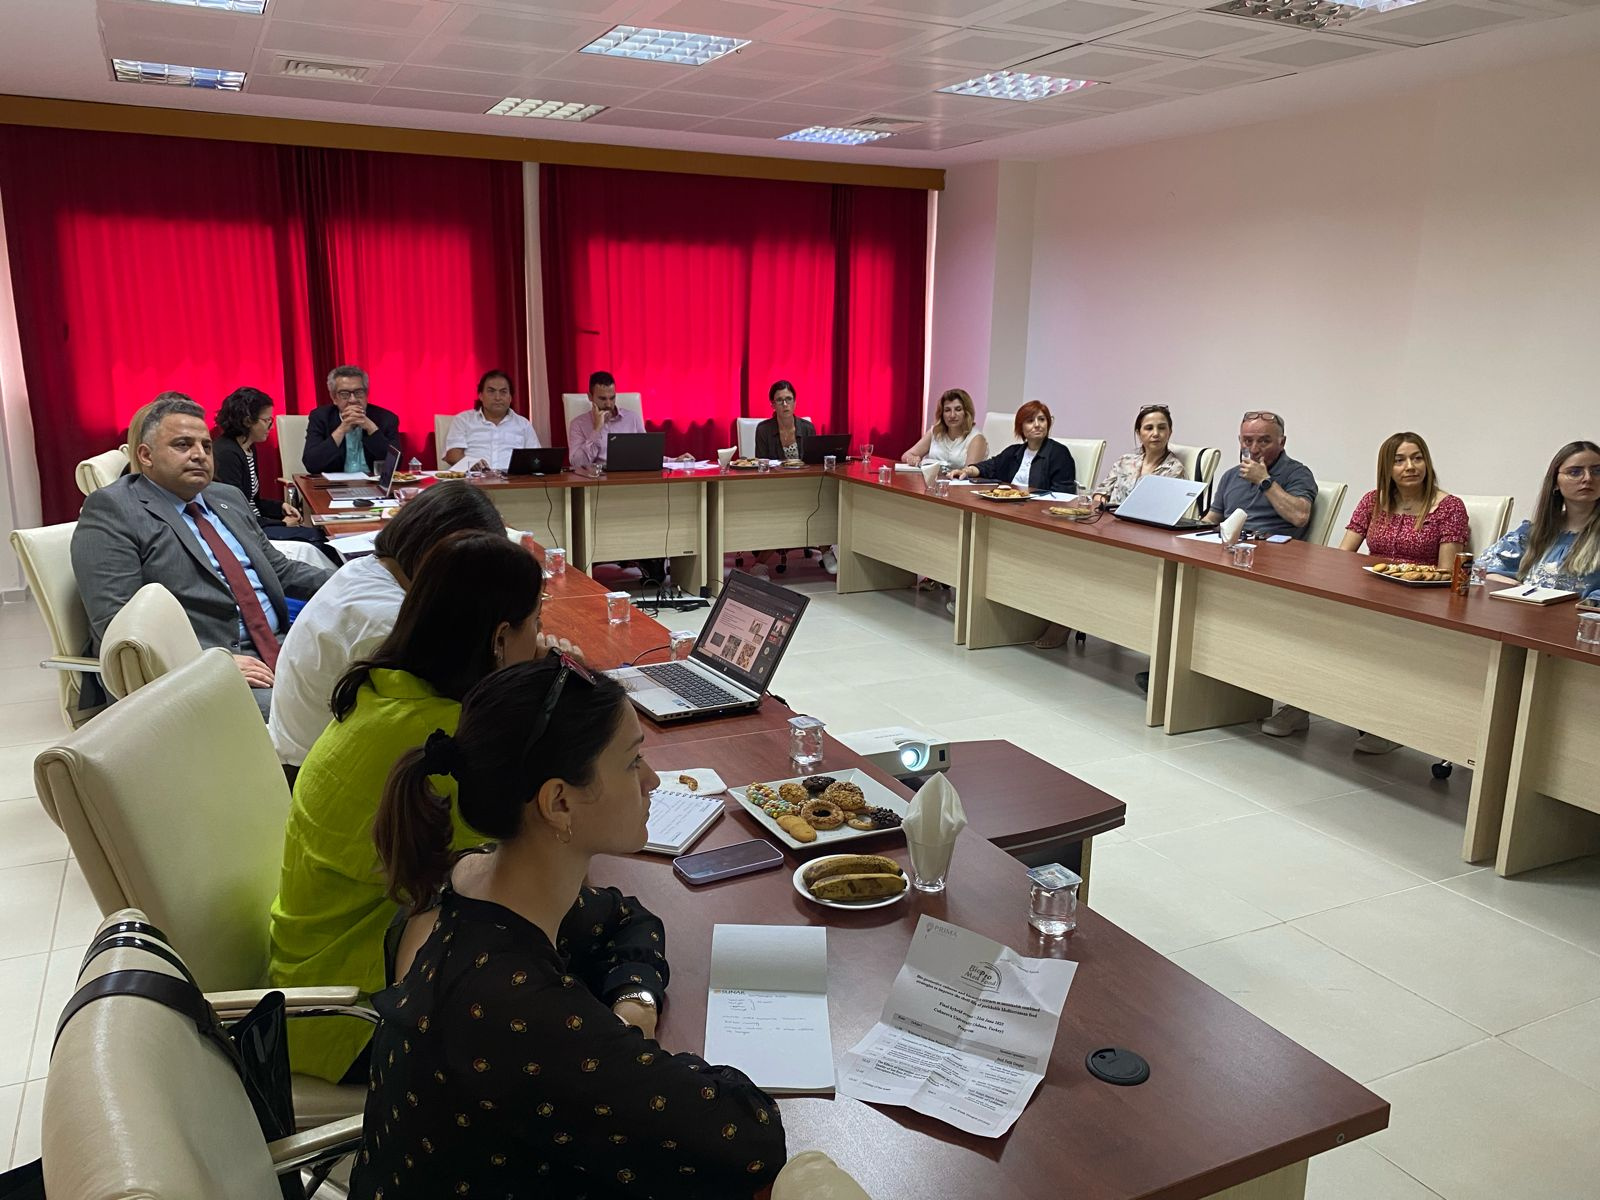 The final meeting of the European Union Project was held at our center